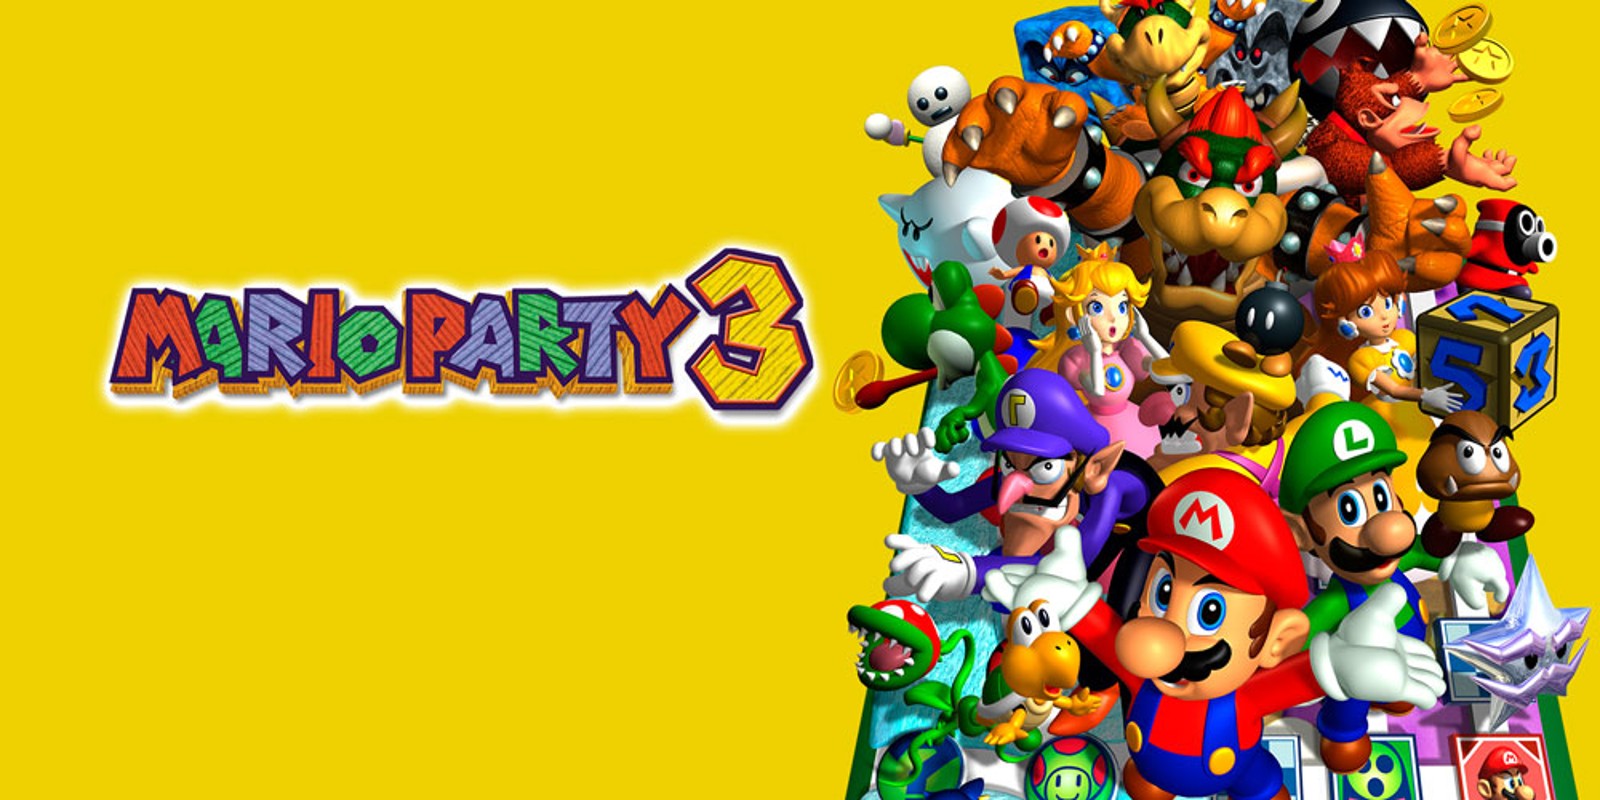 download mario party tour for free